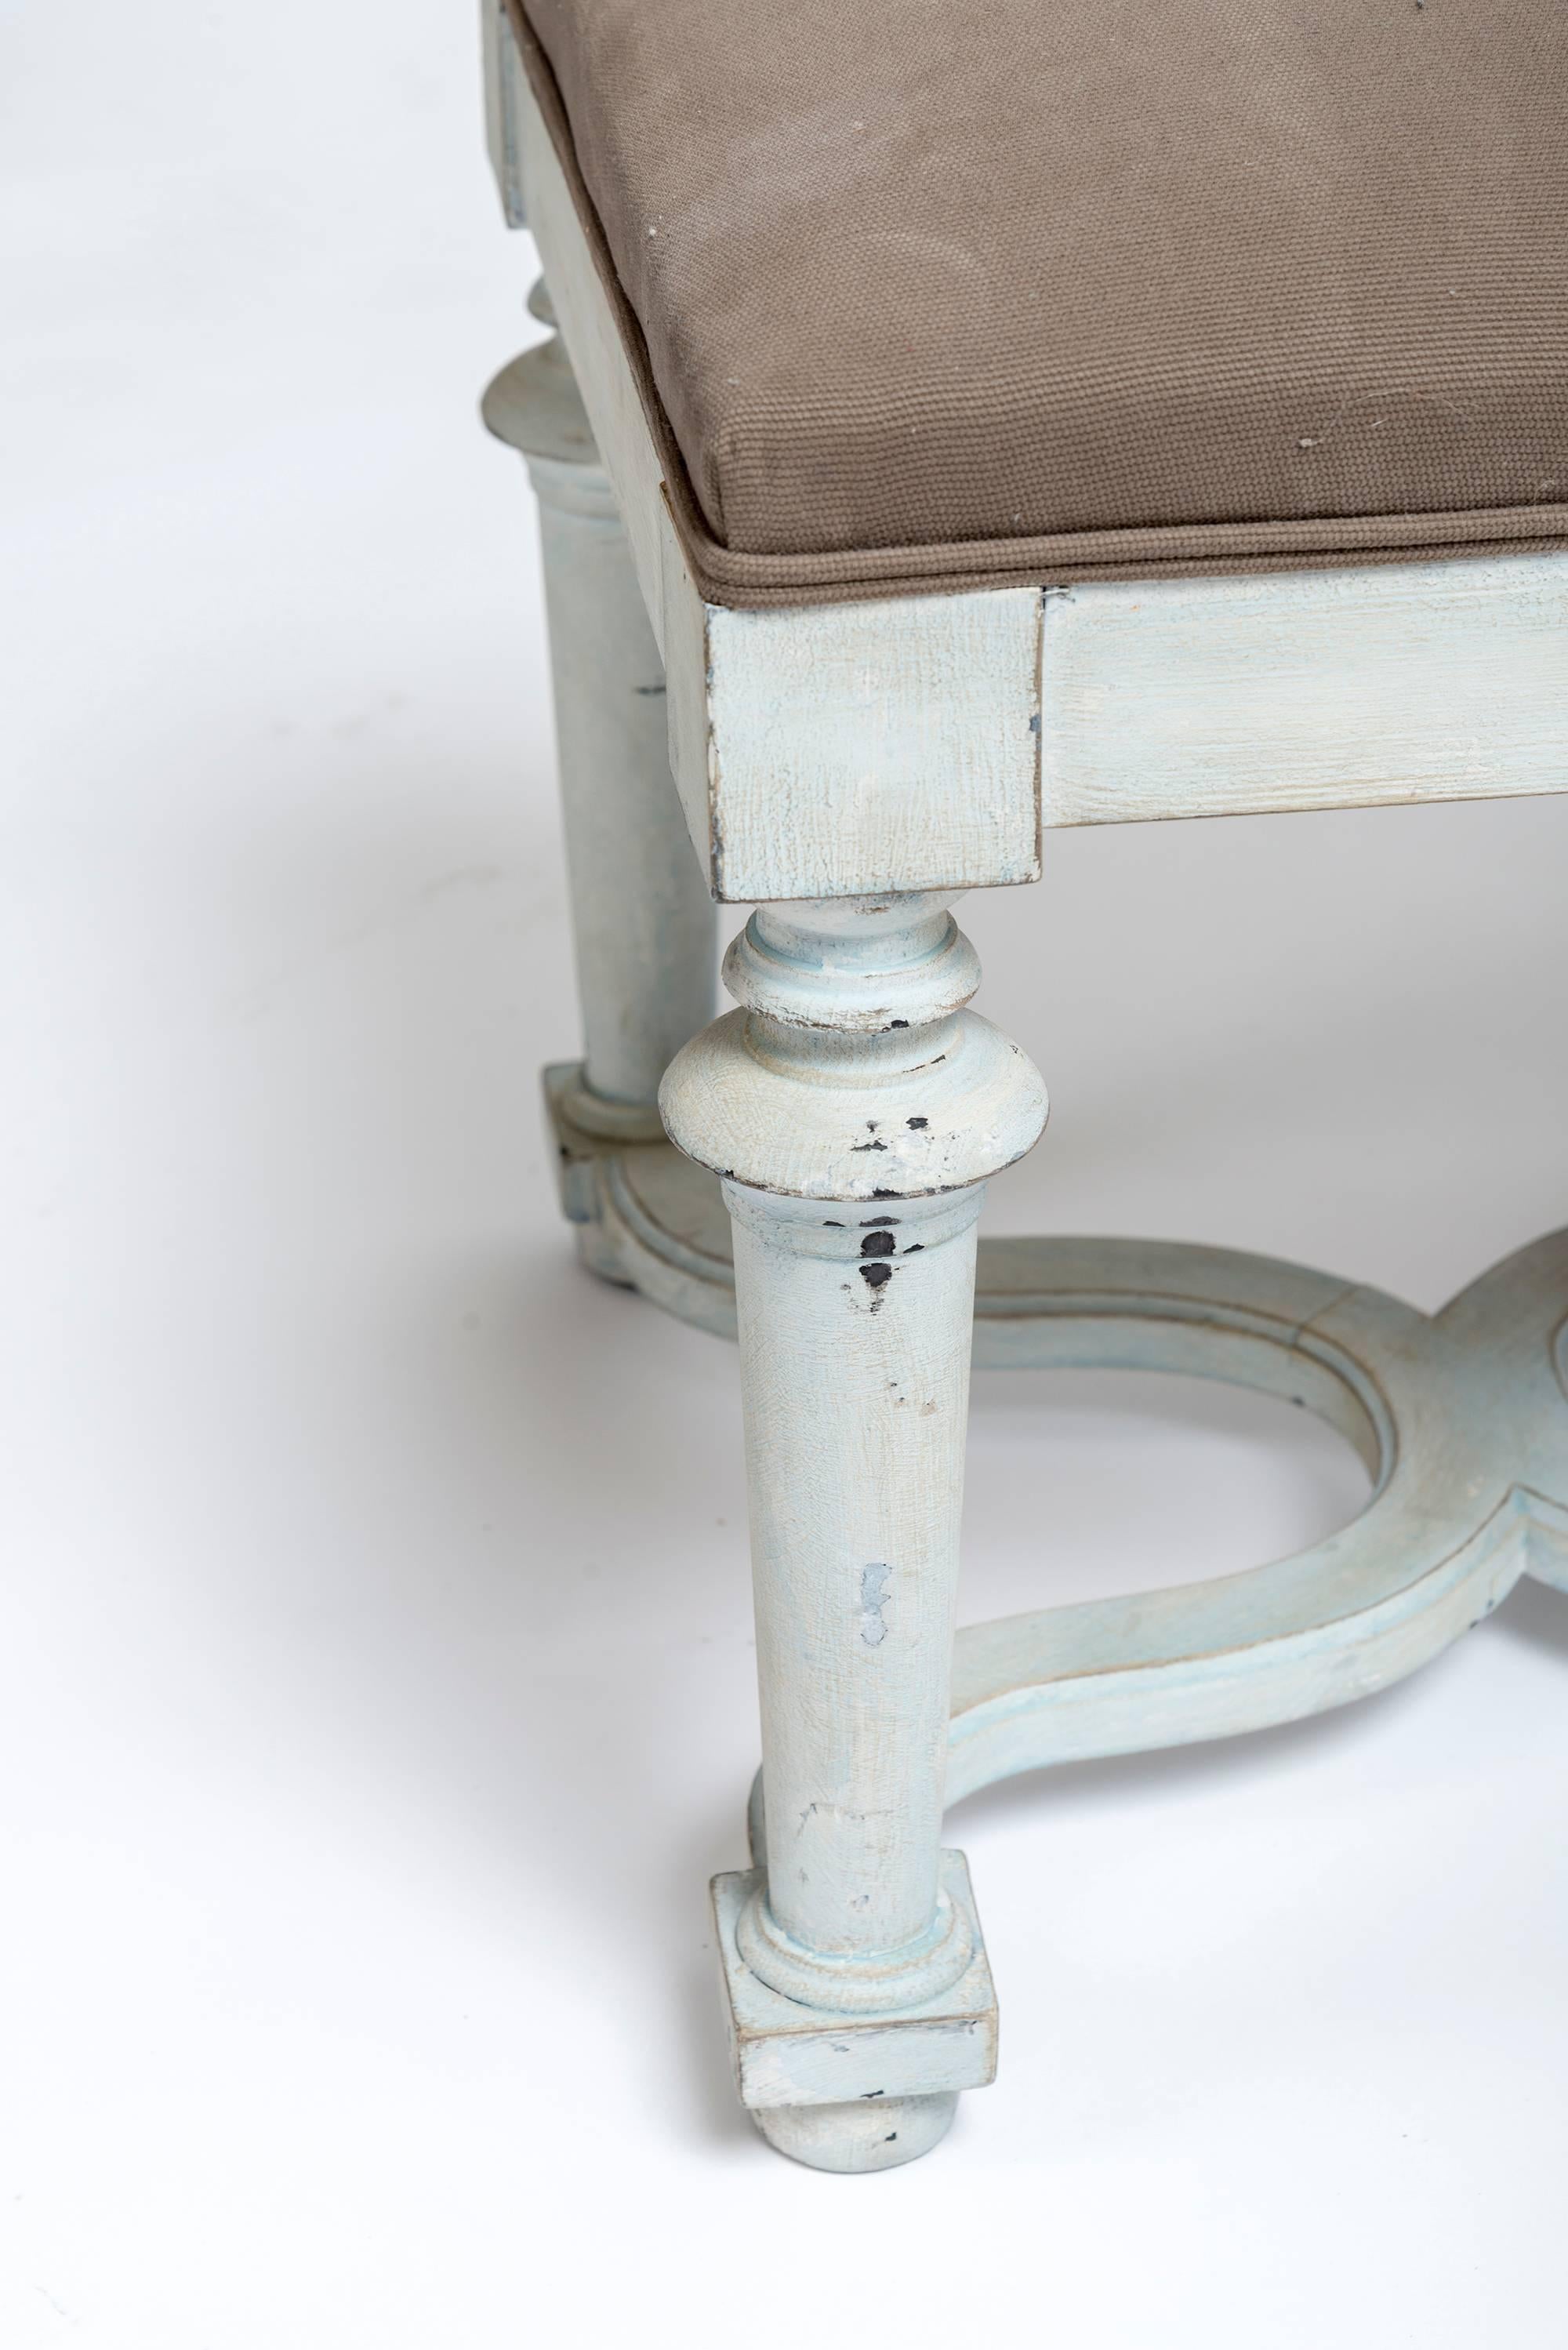 An unusual pair of painted benches with new upholstery, circa 1890 from France. These benches would go beautifully with the Light green console tables with the dark rose-colored marble top and the Piedmont mirrors. A whimsical base makes these an